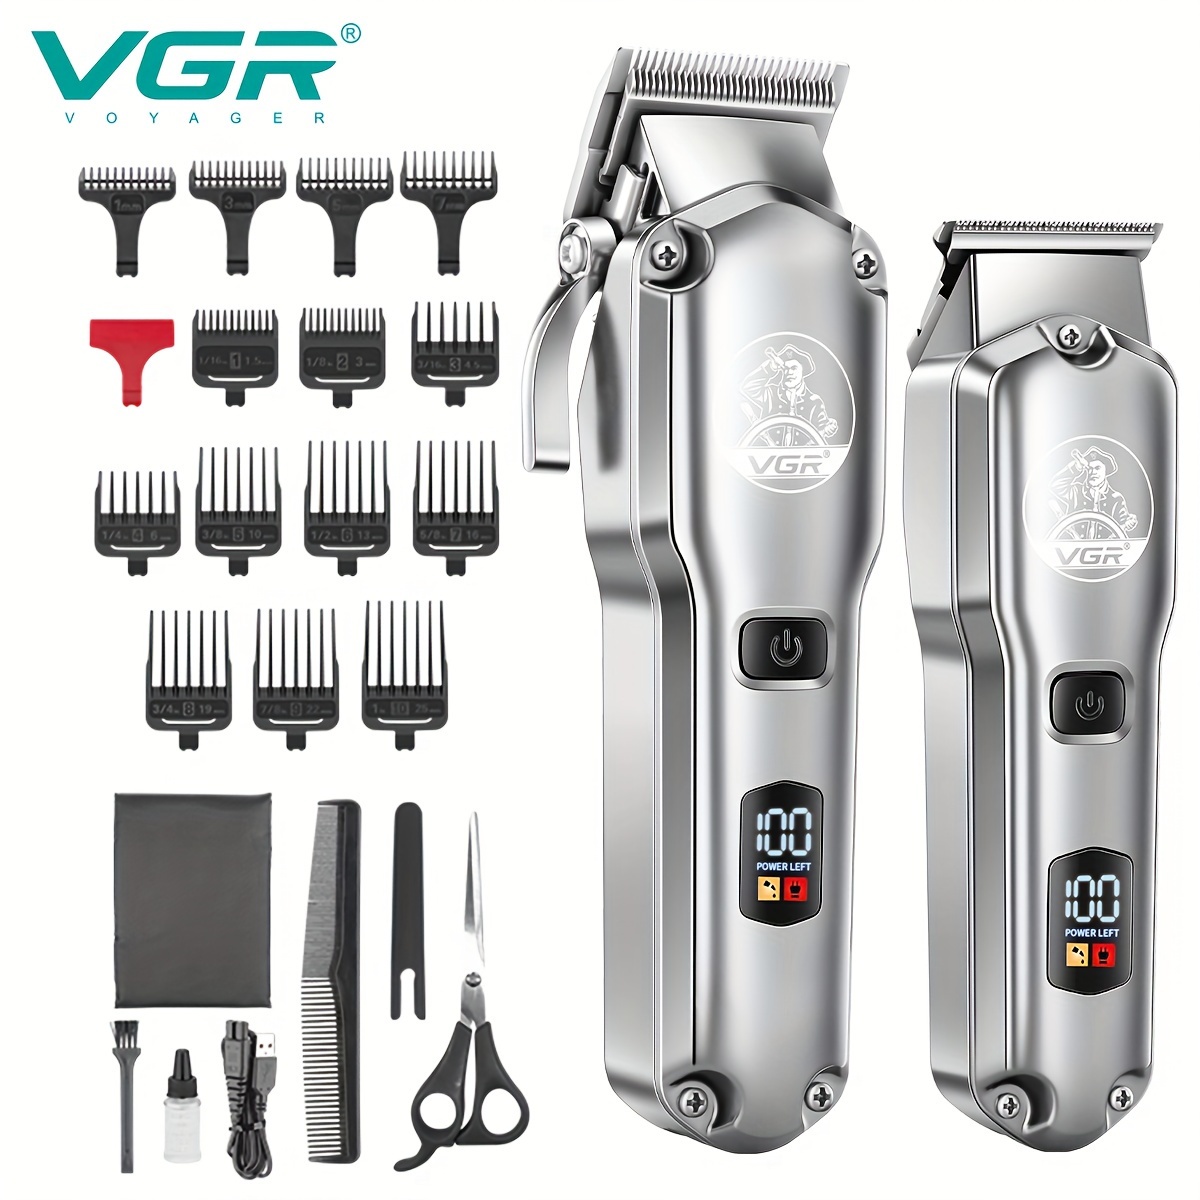 

Vgr Hair Clippers And Trimmers Set For Men Professional, T-blade 0 Gapped Bread Trimmer, Cord/cordless Haircutting Kit, Rechargeable Led Display, Gift For Men